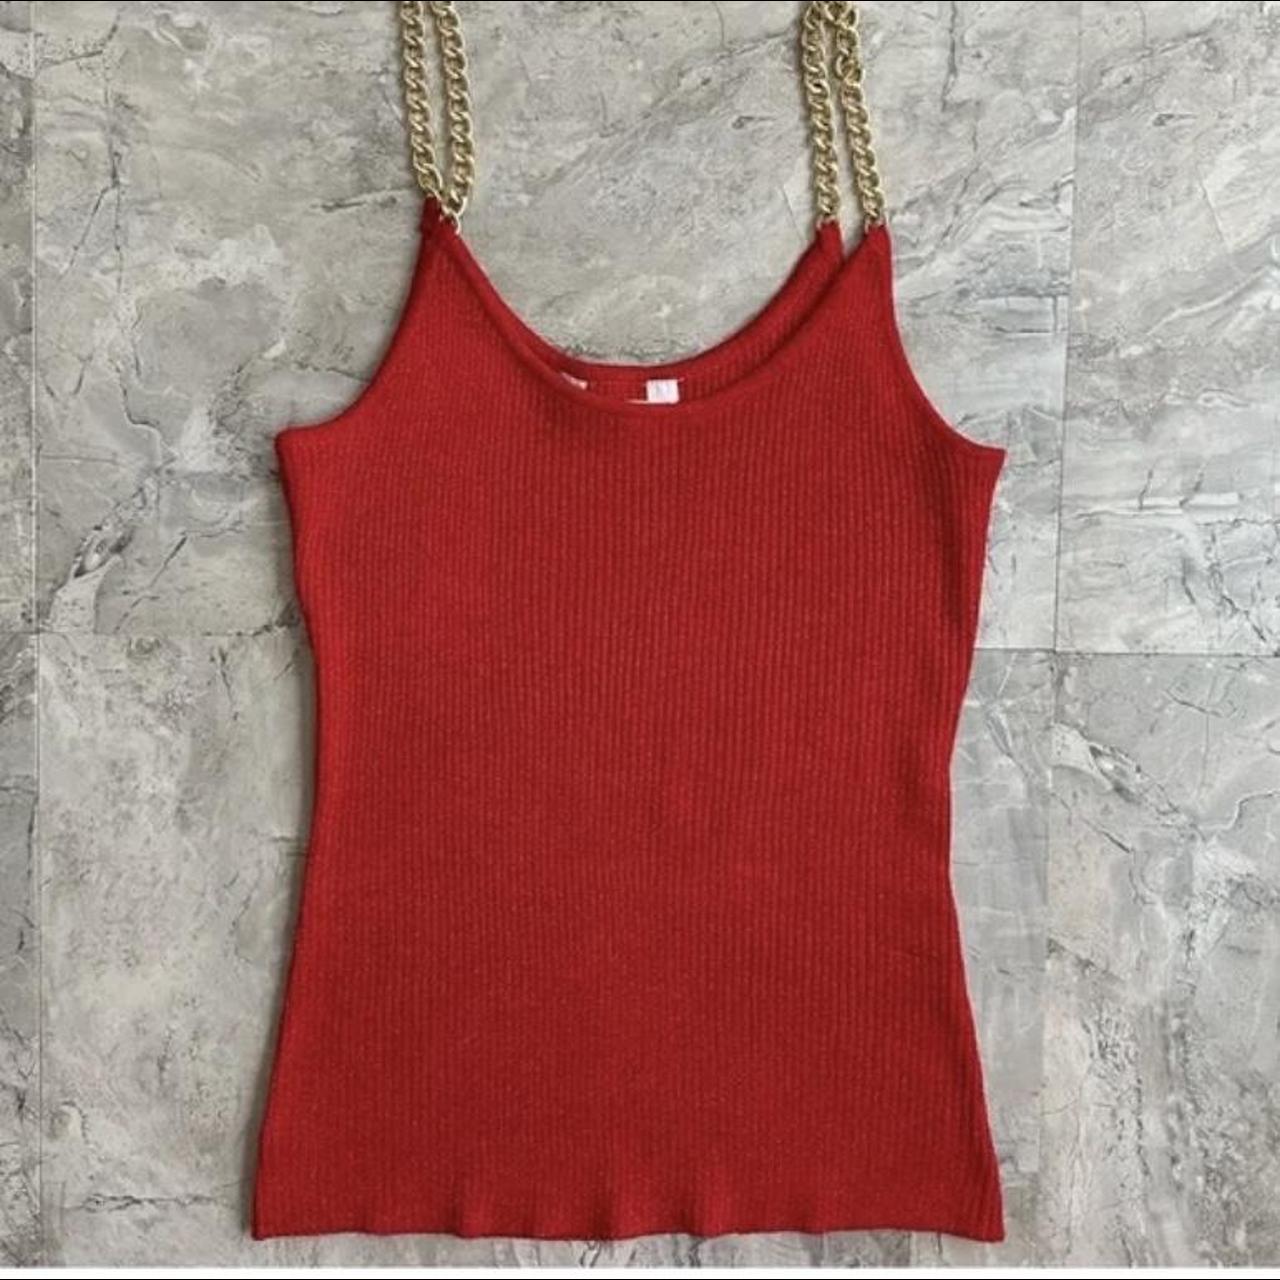 y2k sparkly hot red chain strap tank top 💋 ⋆... - Depop